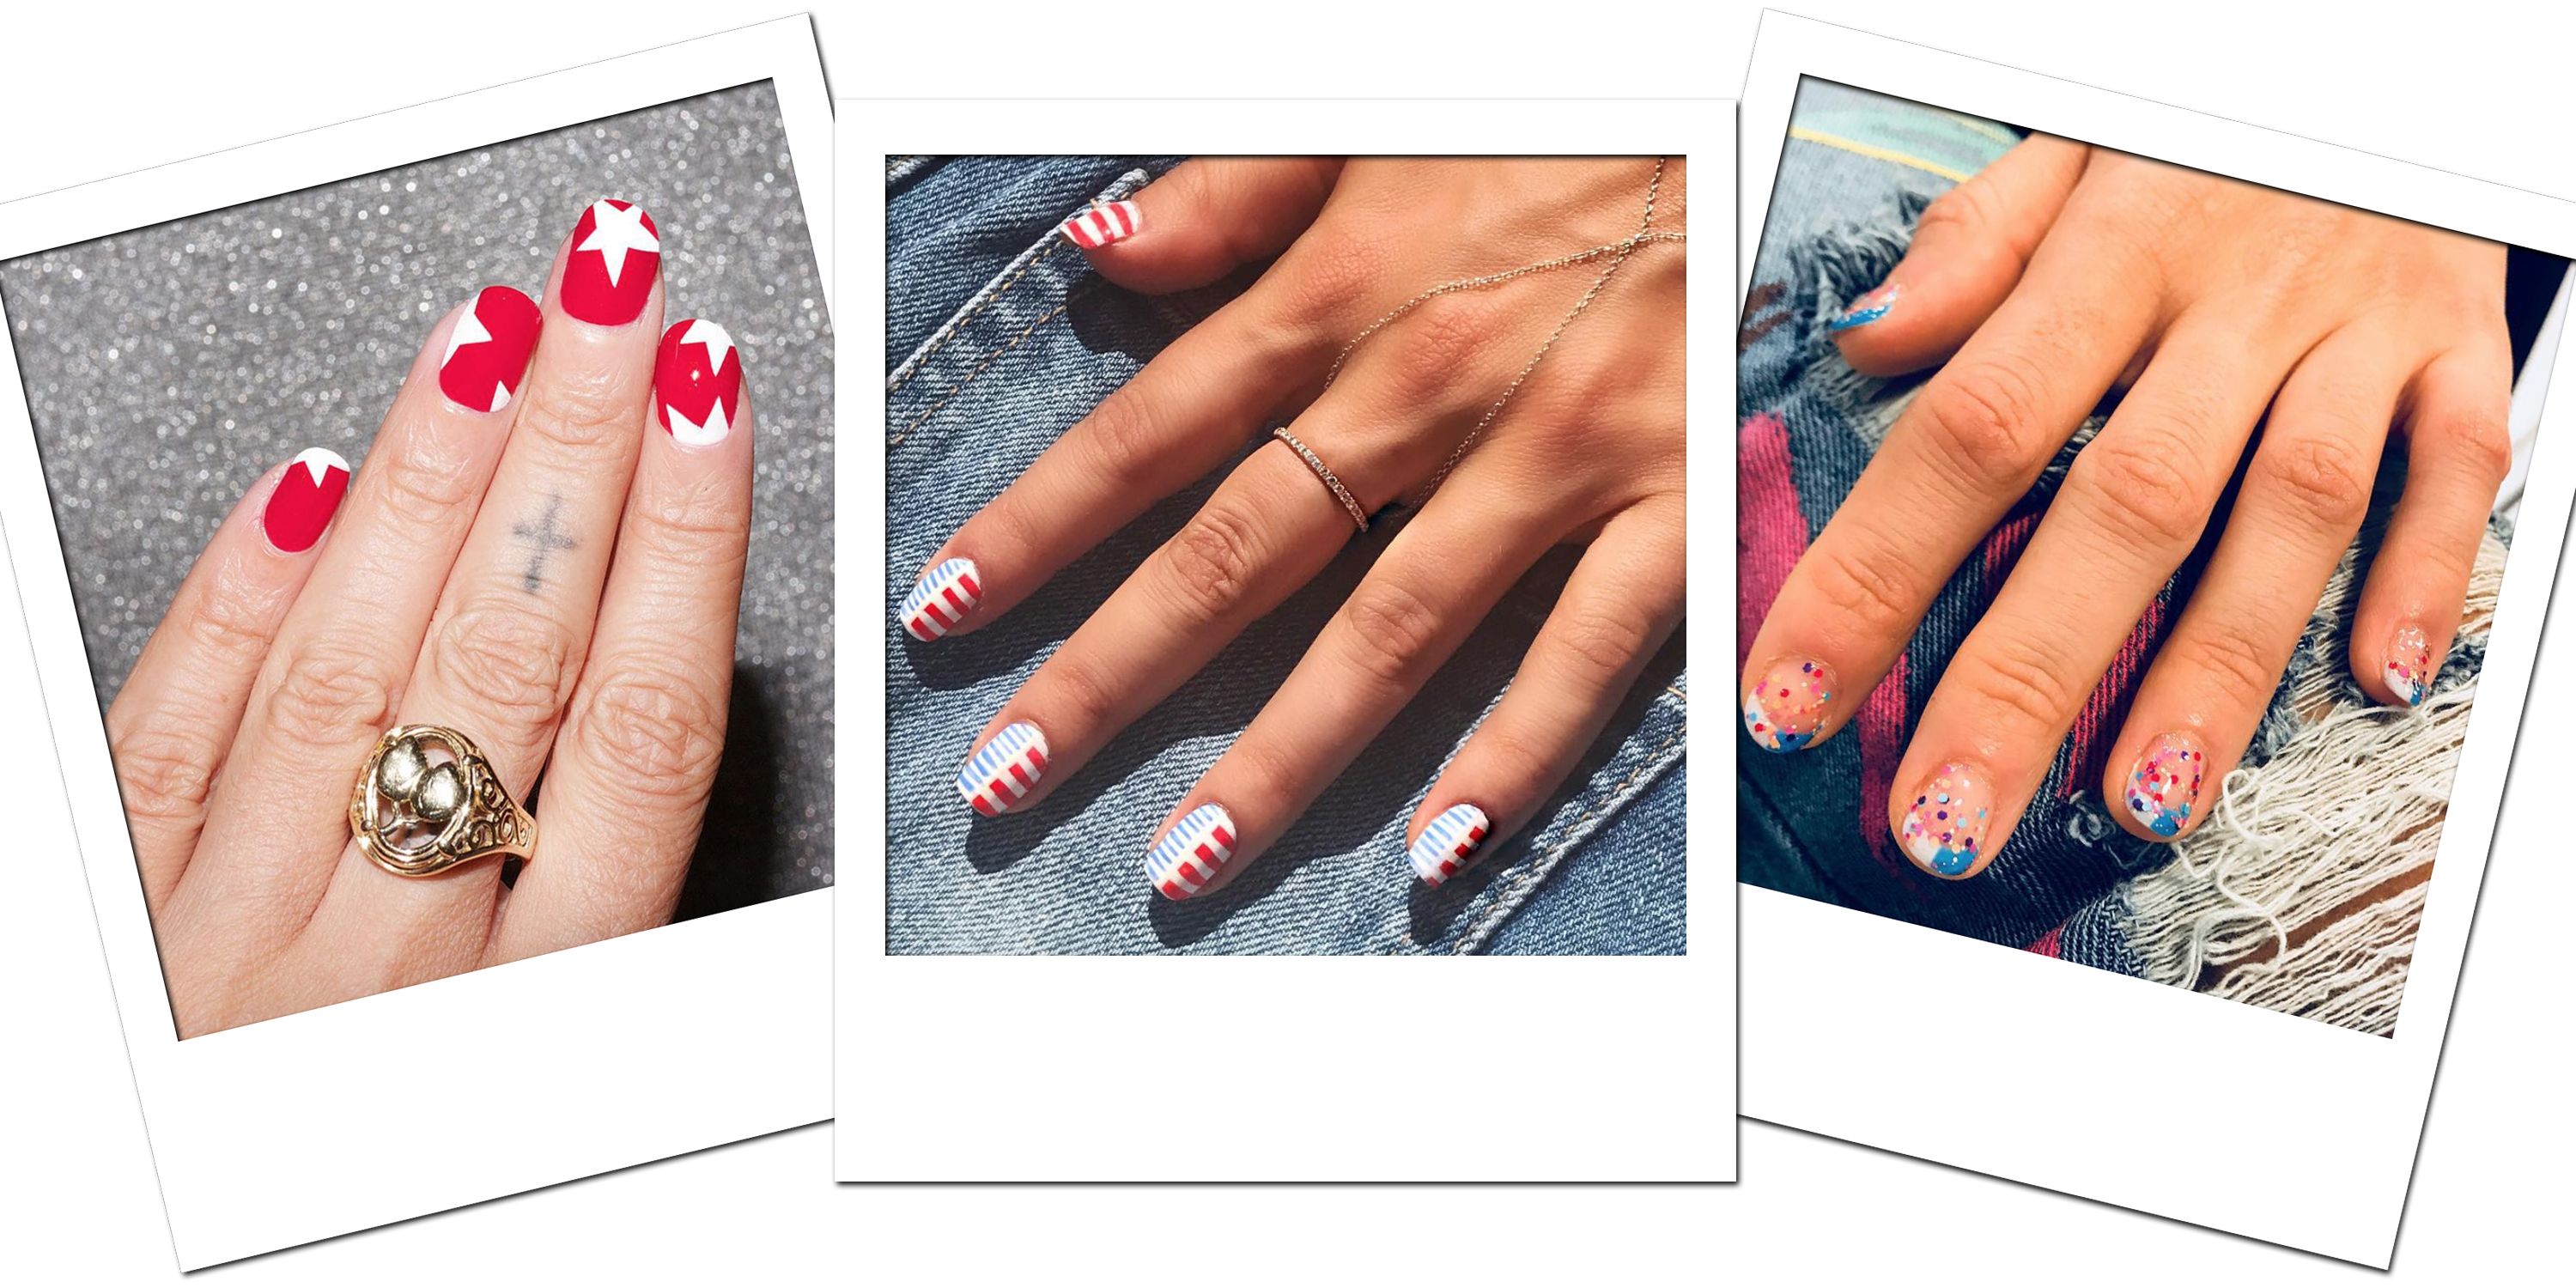 5. Firework Nail Art for the Fourth of July - wide 3